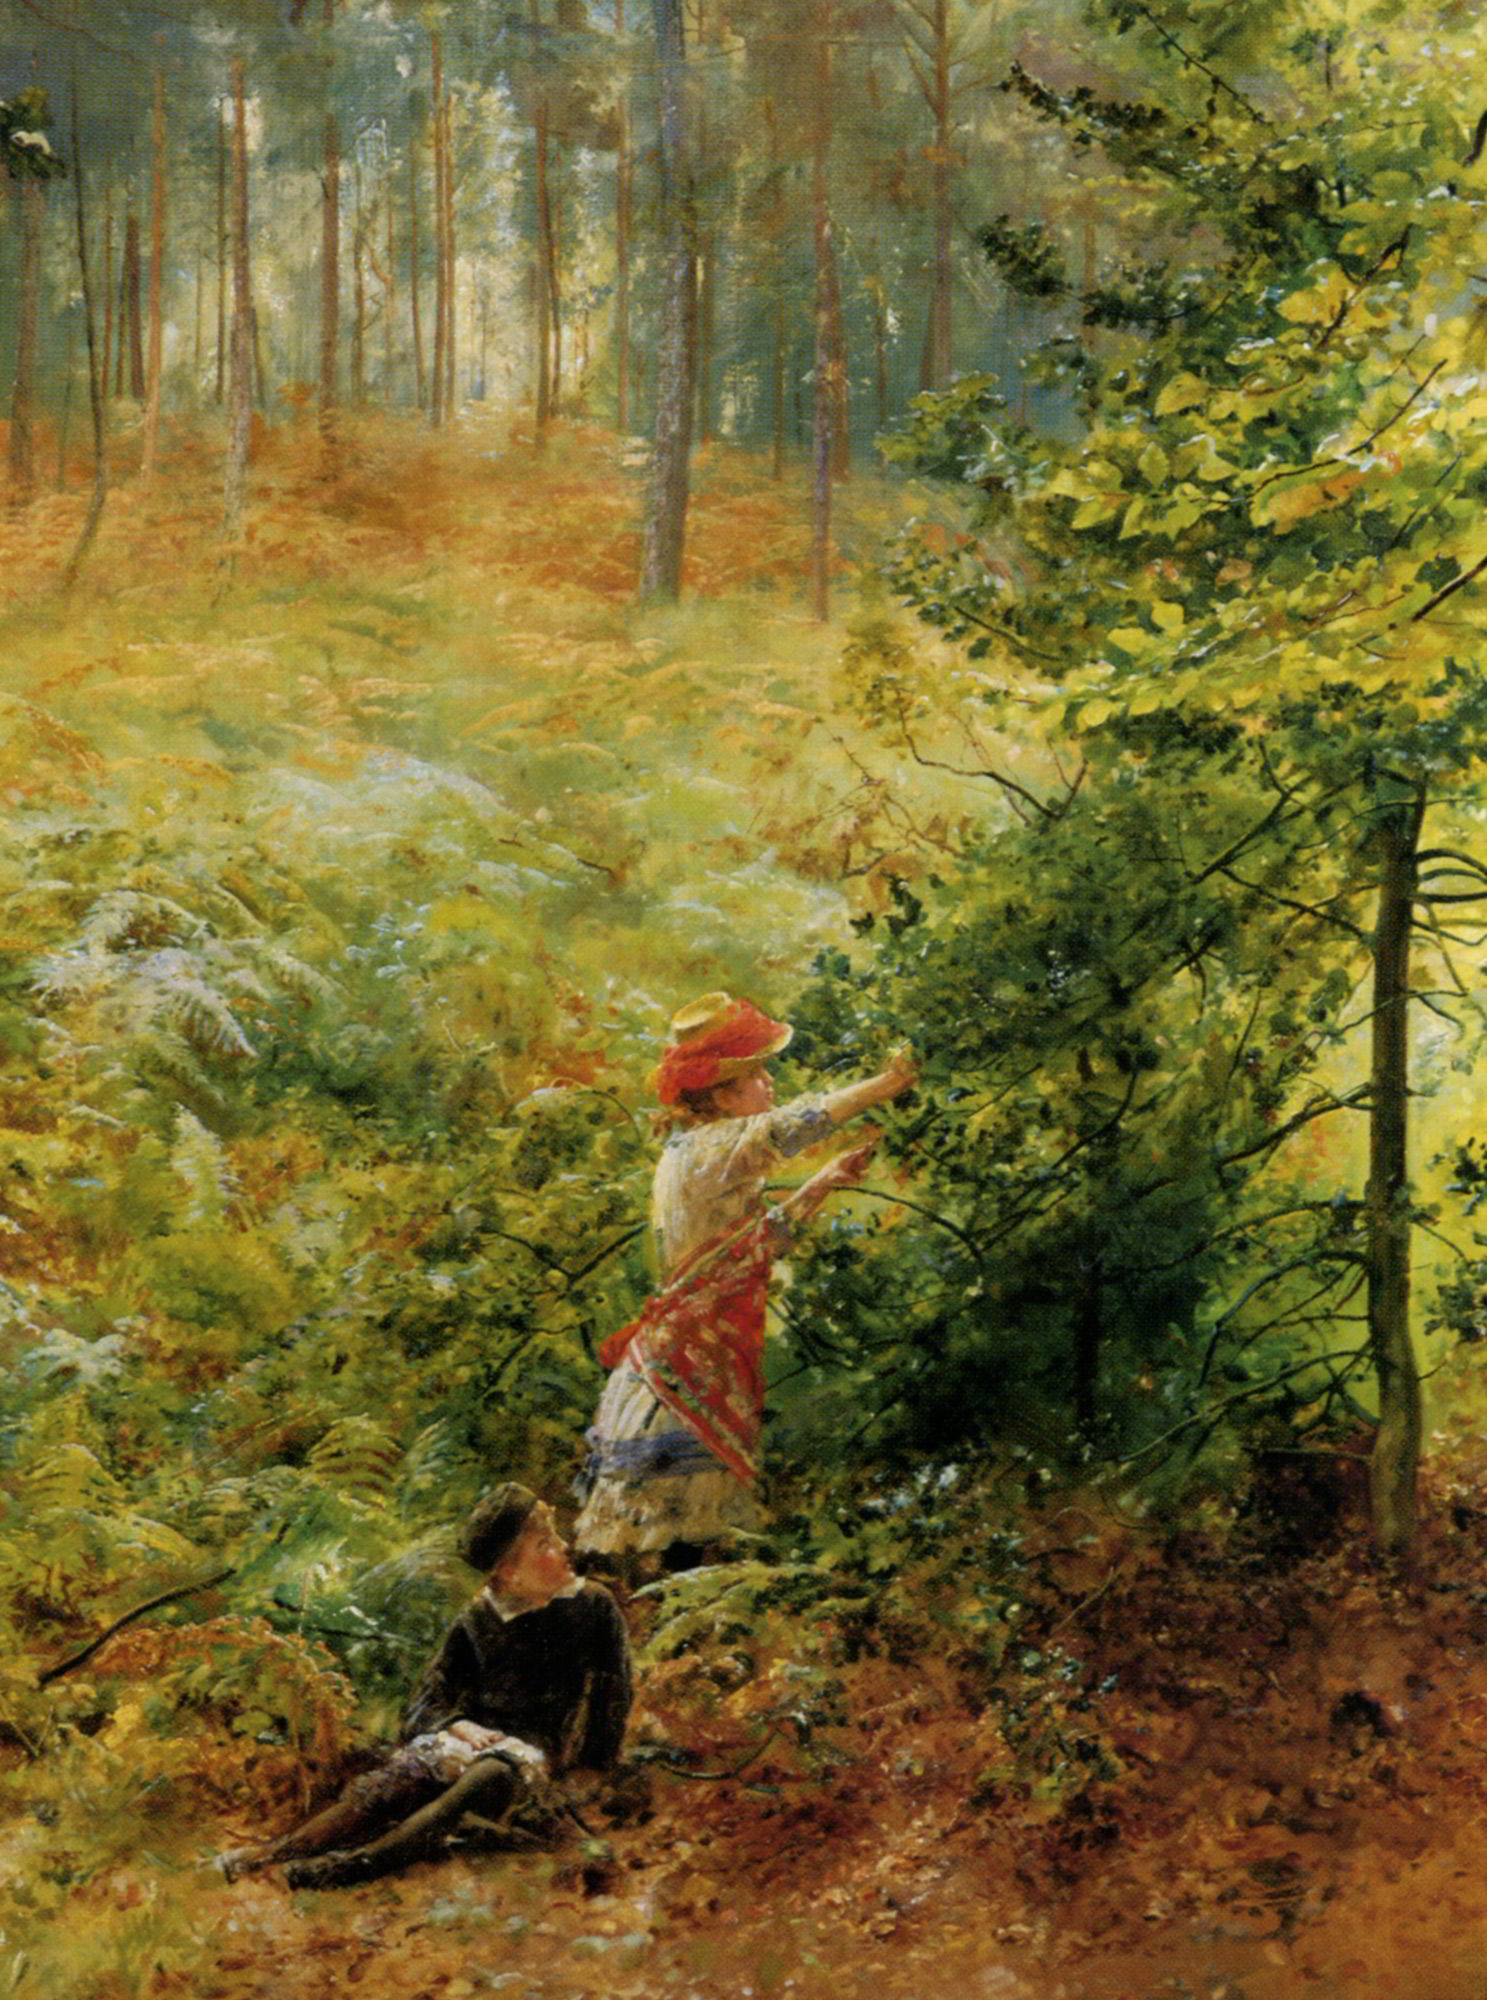 Picking Berries in the Woods by Robert Ponsonby Staples (Sir Robert Ponsonby Staples)-Oil Painting